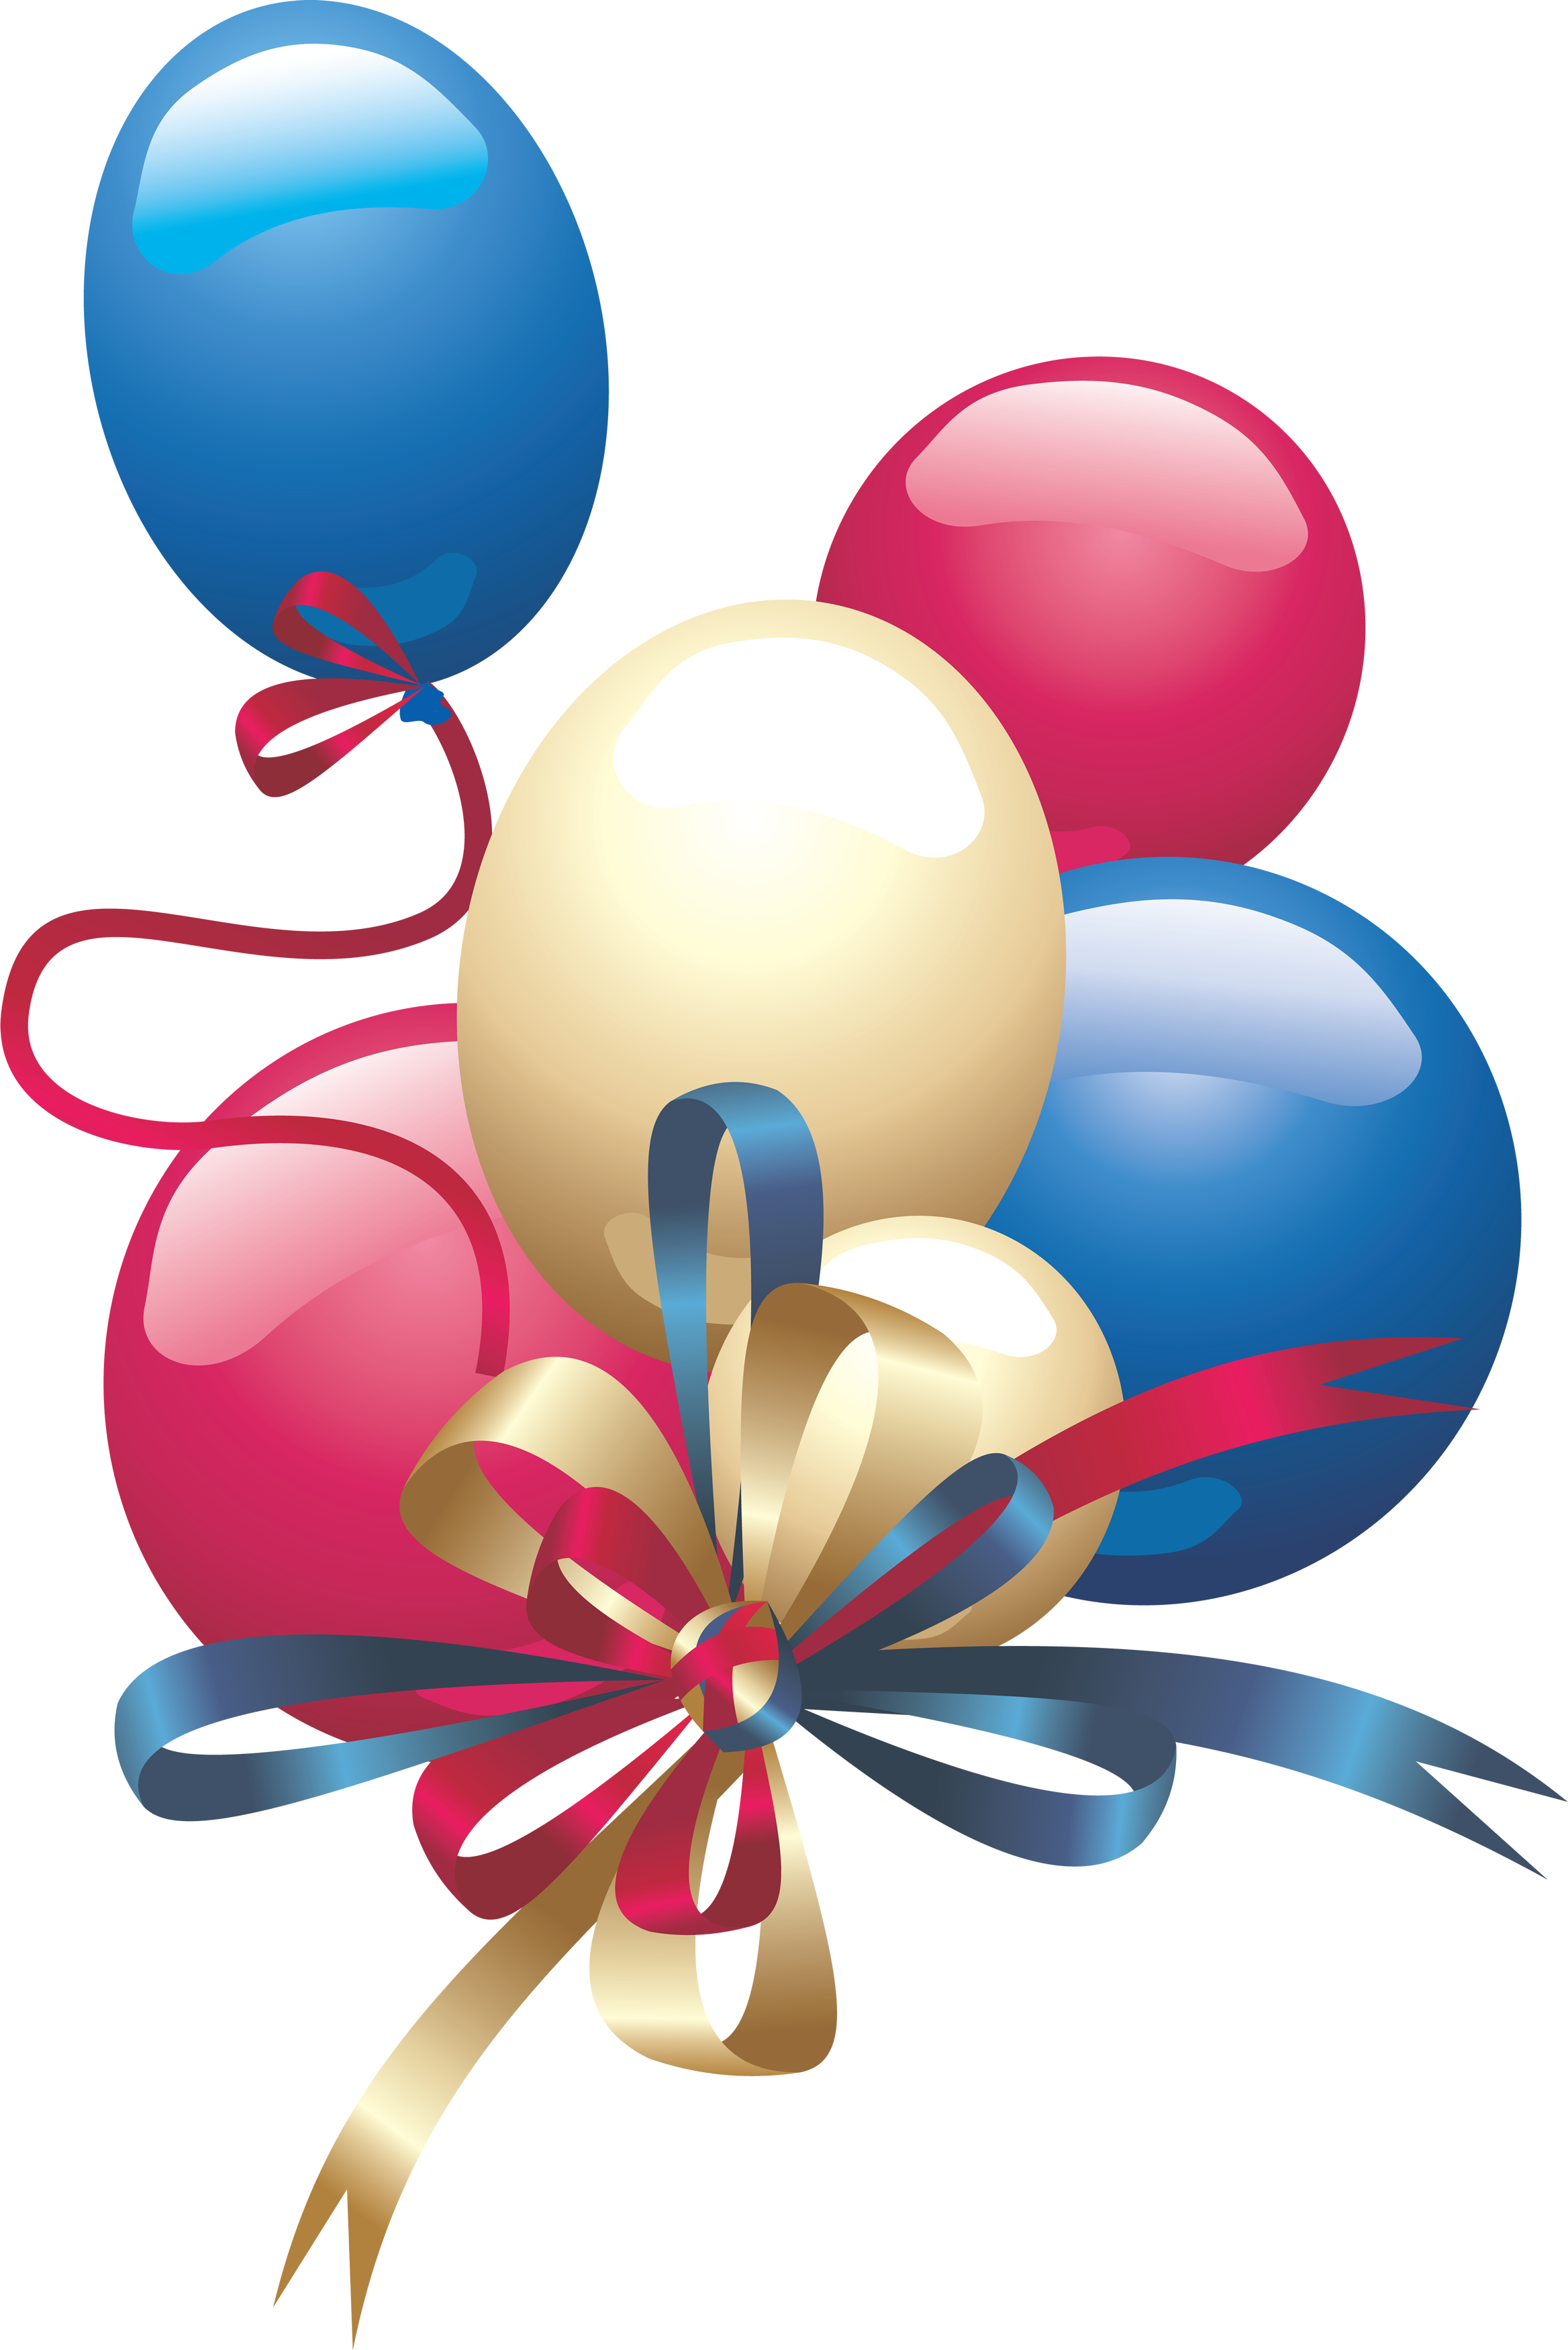 Colorful Happy Birthday Balloons Transparent Image